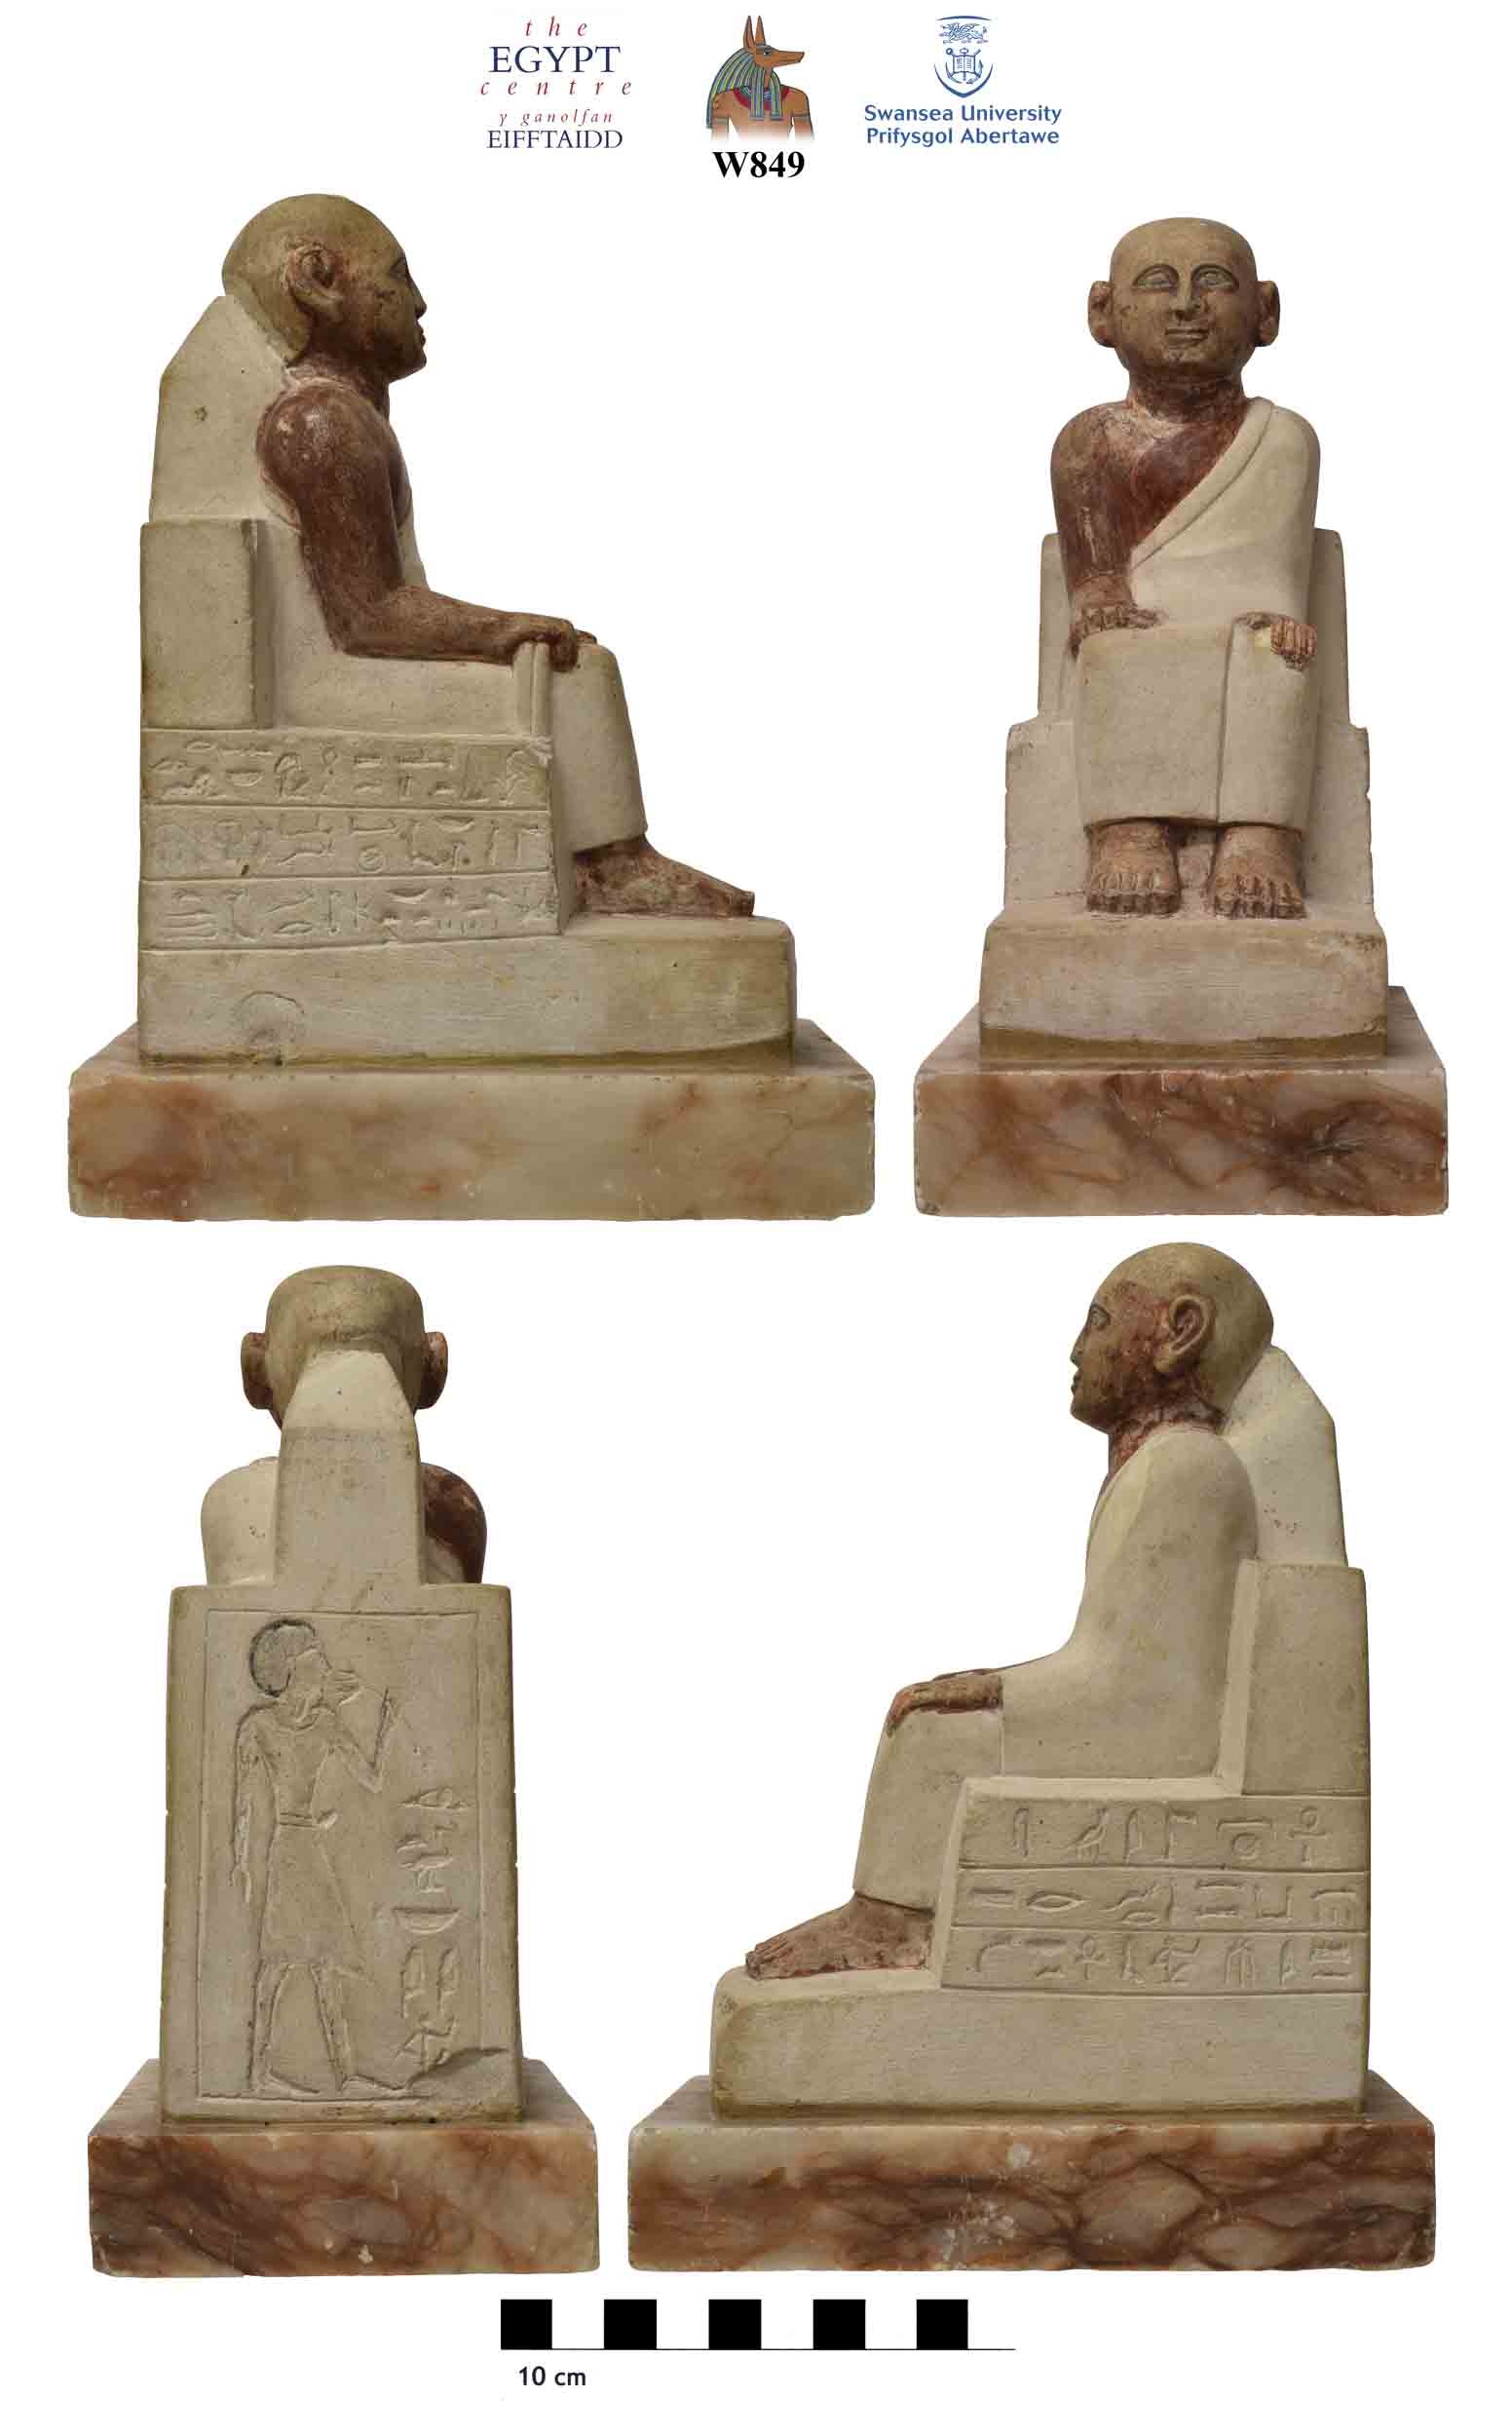 Image for: Statue of a seated man